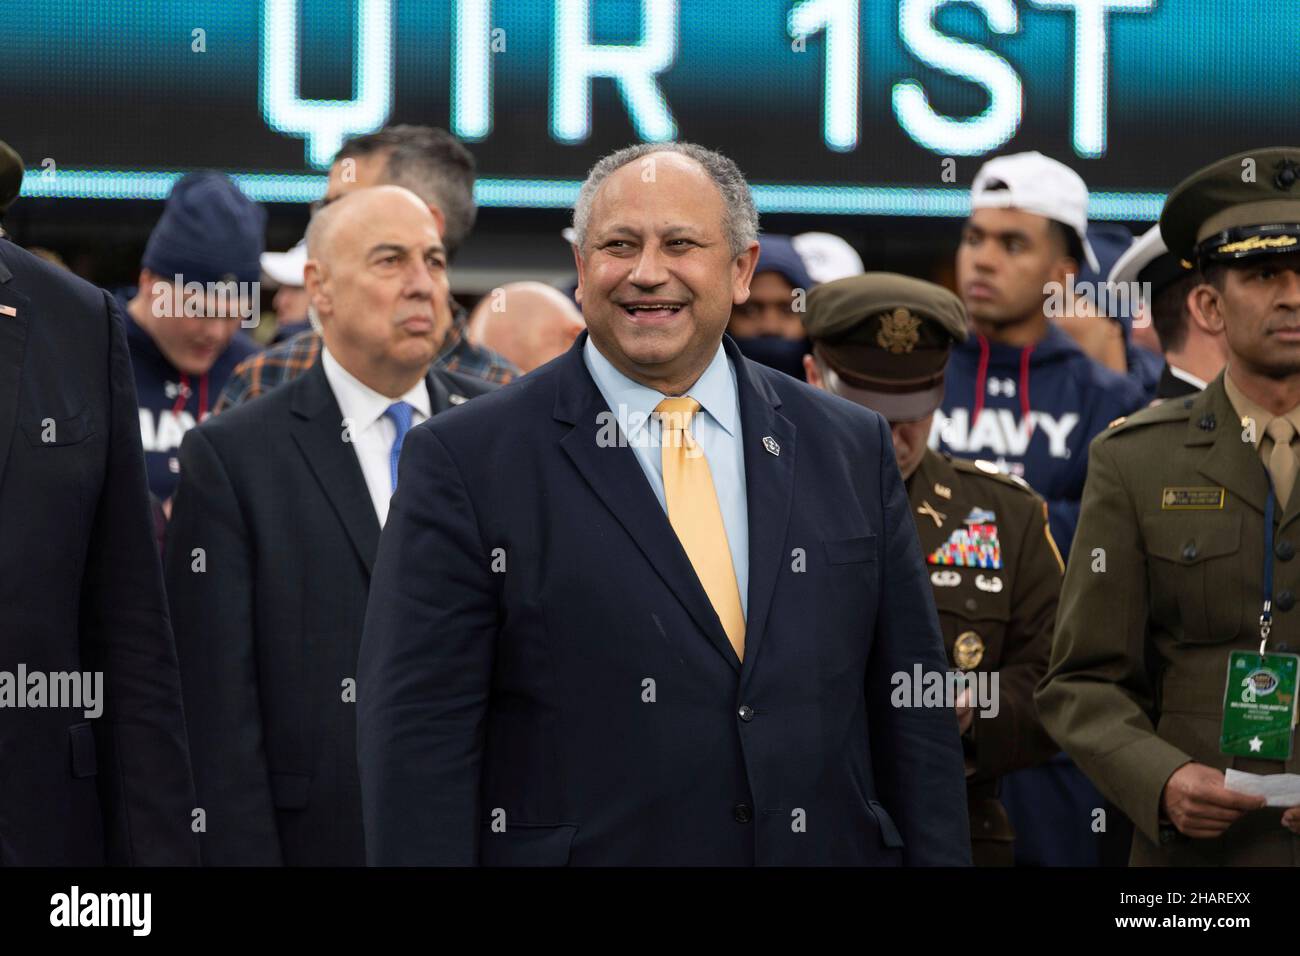 East Rutherford, United States of America. 11 December, 2021. U.S. Secretary of the Navy Carlos Del Toro waits for the coin toss at the start of the annual Army-Navy football game at Metlife Stadium December 11, 2021 in East Rutherford, New Jersey. The U.S. Naval Academy Midshipmen defeated the Army Black Knights 17-13 in their 122nd matchup.  Credit: Stacy Godfrey/U.S. Navy Photo/Alamy Live News Stock Photo